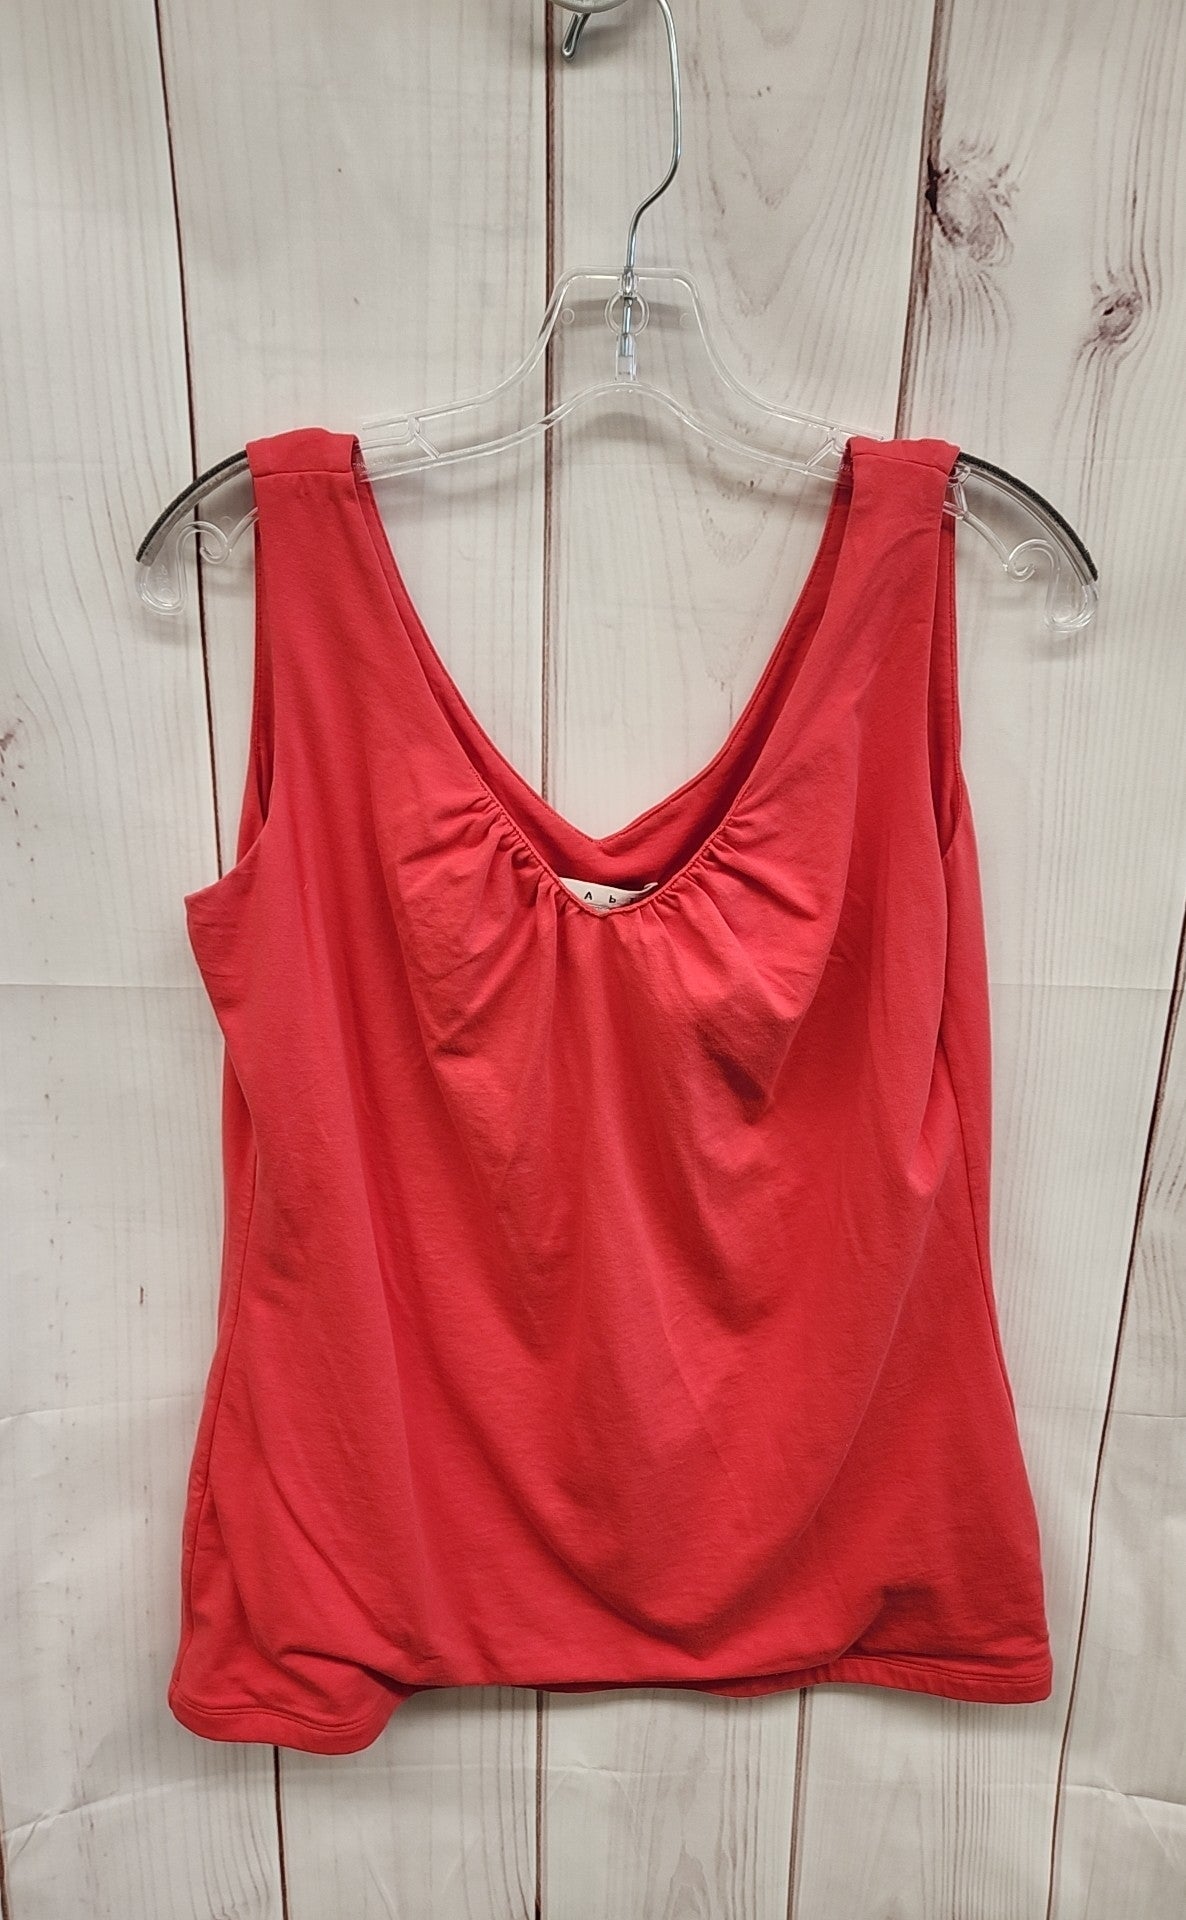 Cabi Women's Size L Coral Sleeveless Top